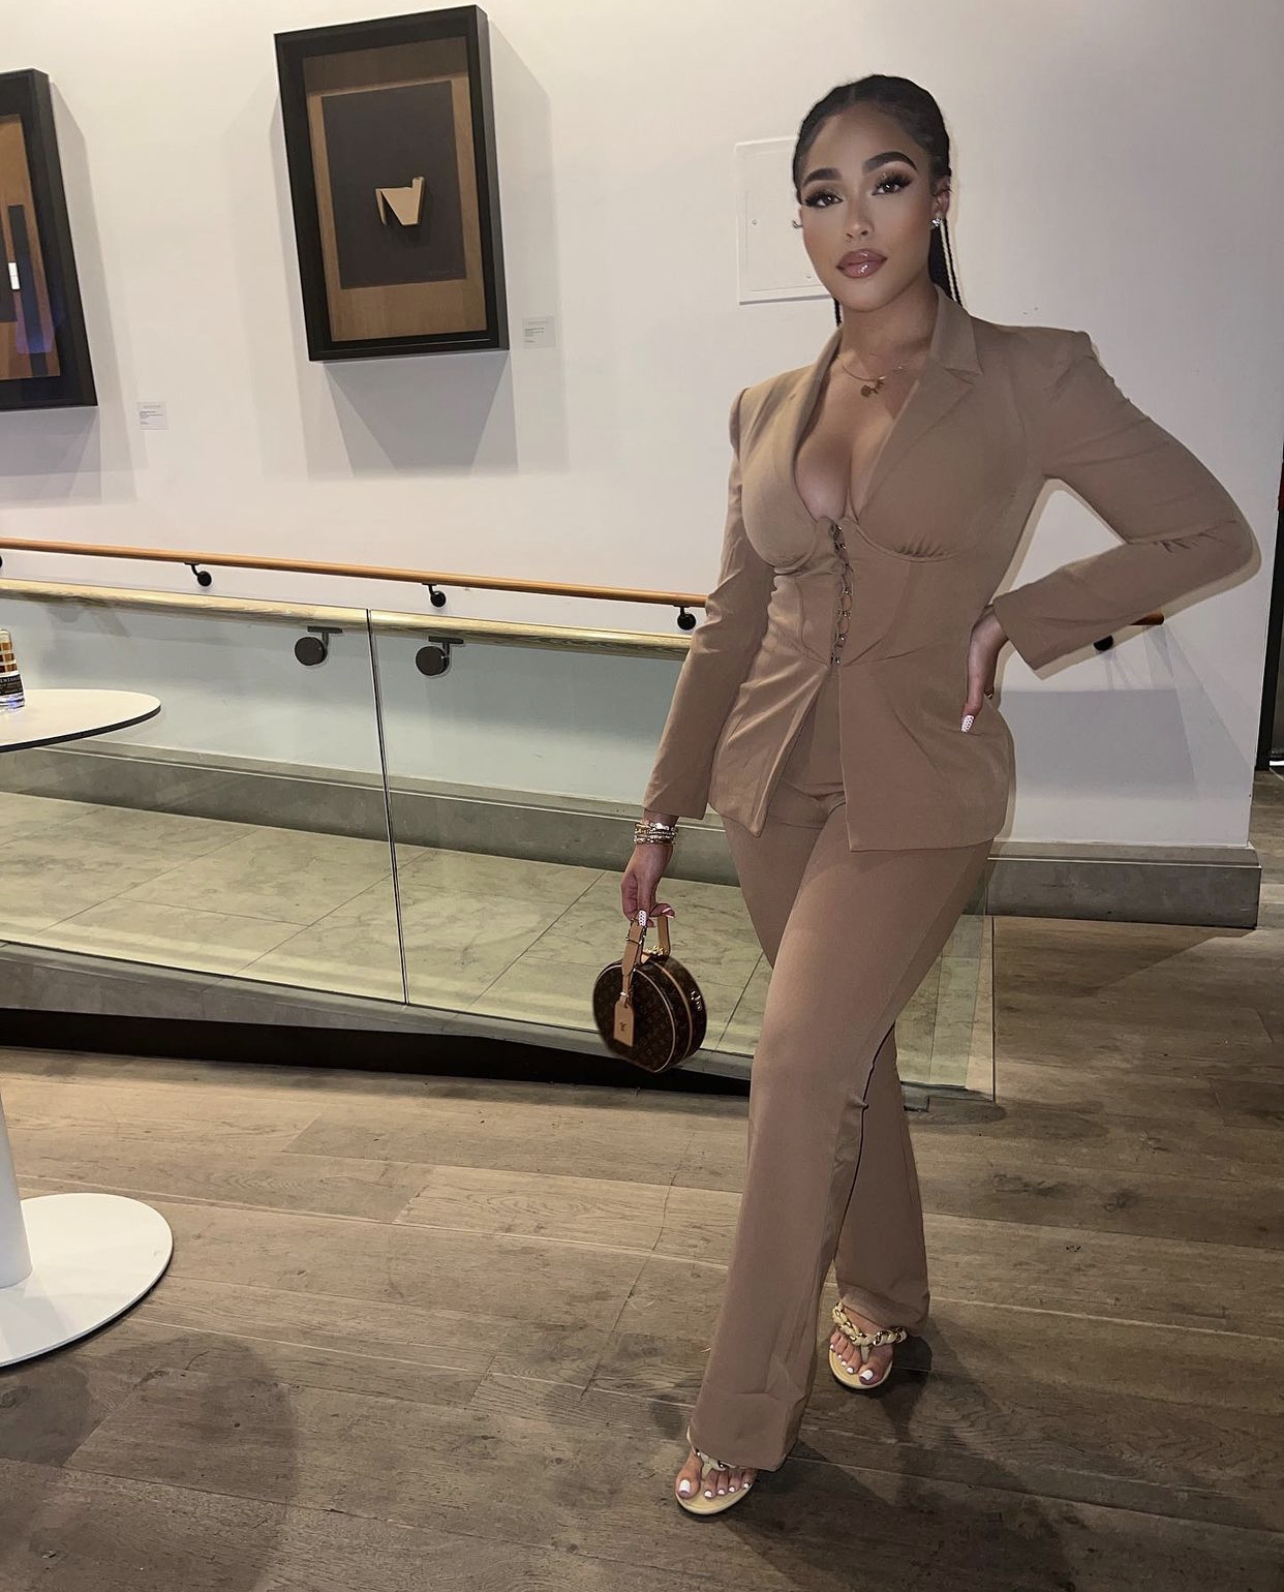 Jordyn Woods steps out in this Lebanese designer's outfit